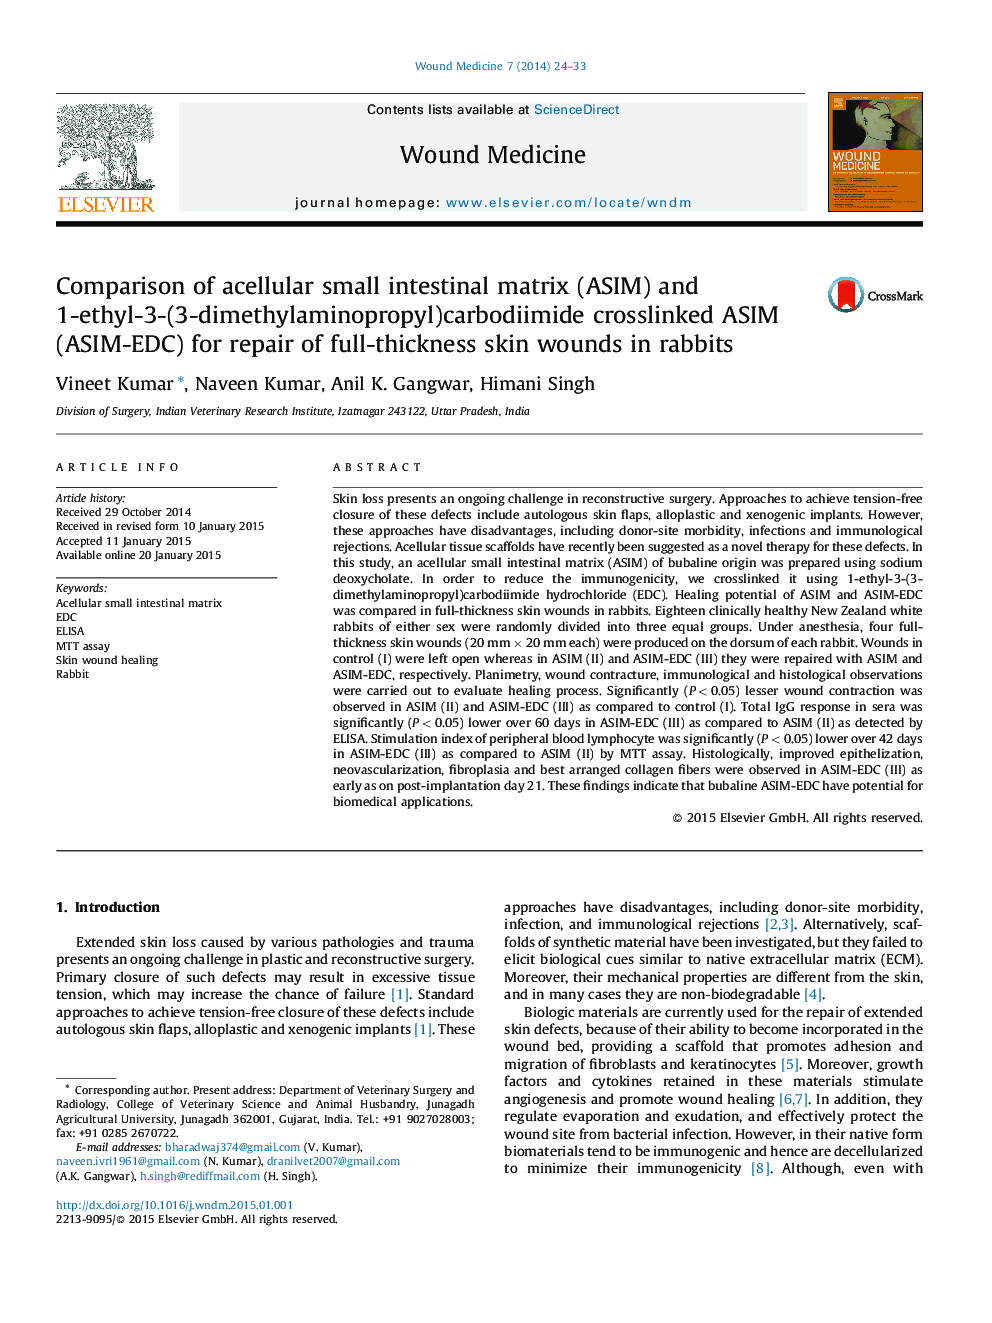 Comparison of acellular small intestinal matrix (ASIM) and 1-ethyl-3-(3-dimethylaminopropyl)carbodiimide crosslinked ASIM (ASIM-EDC) for repair of full-thickness skin wounds in rabbits